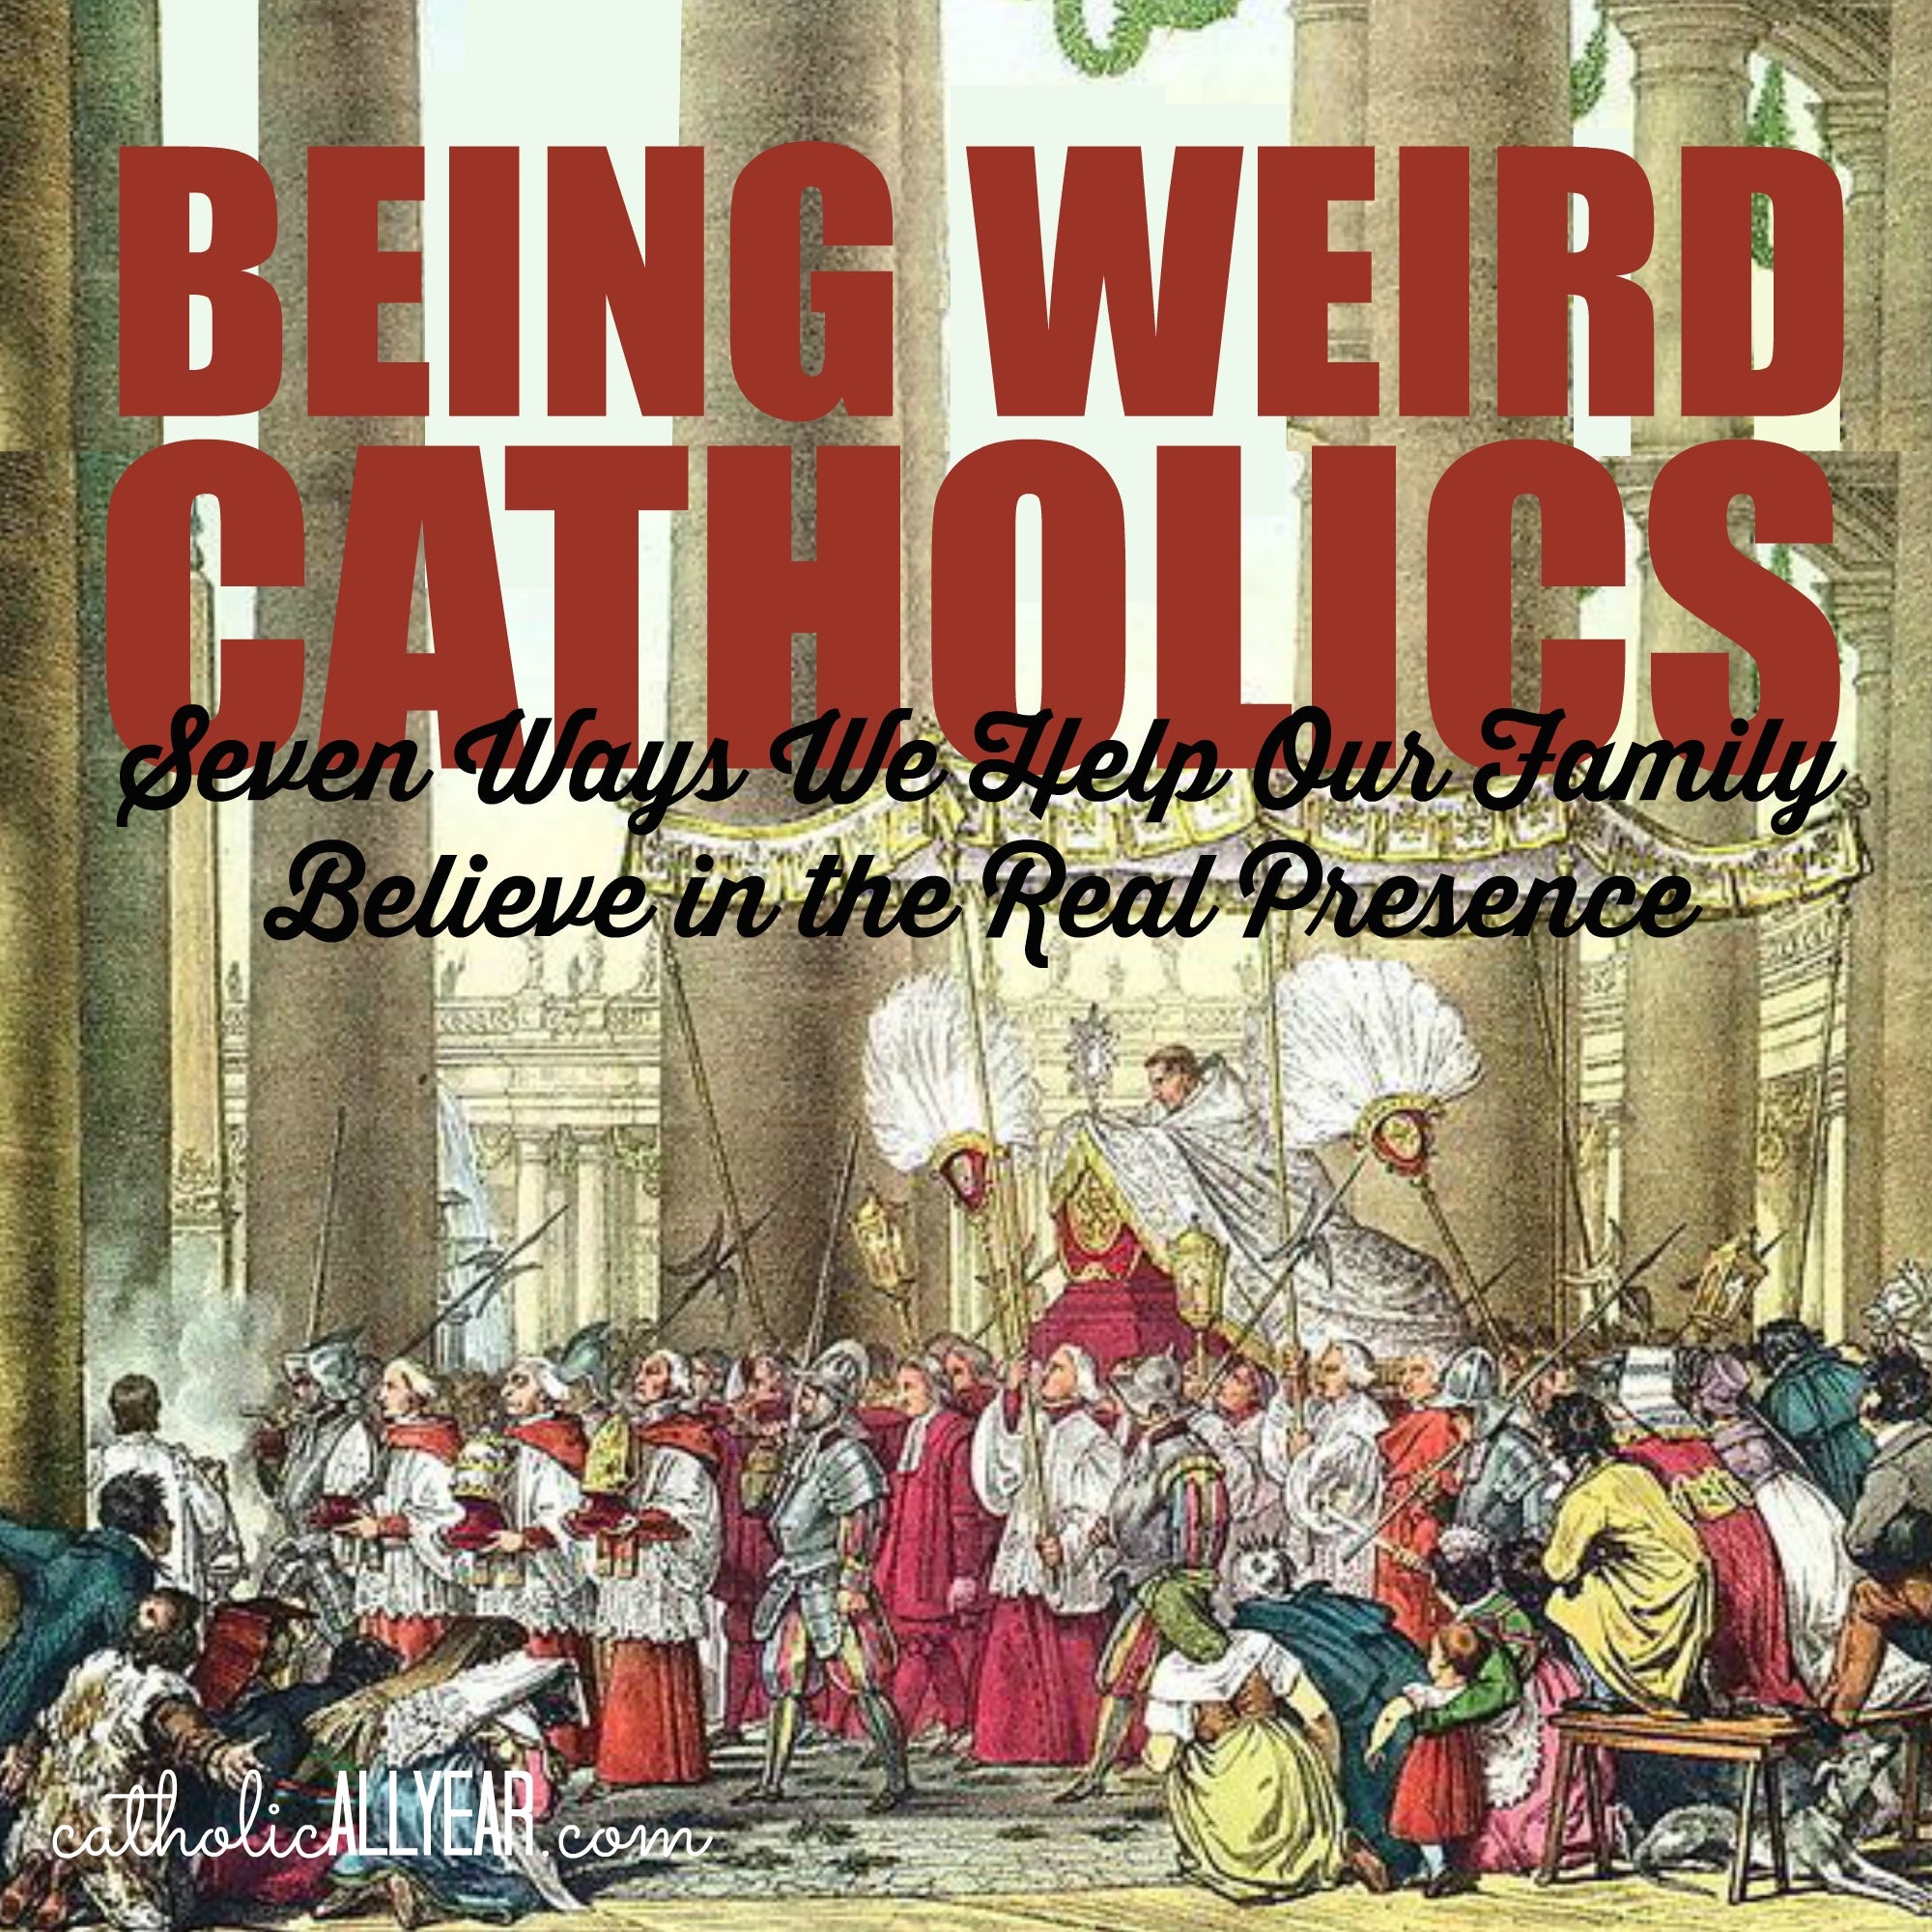 Being Weird Catholics: Seven Ways We Help Our Family Believe in the Real Presence